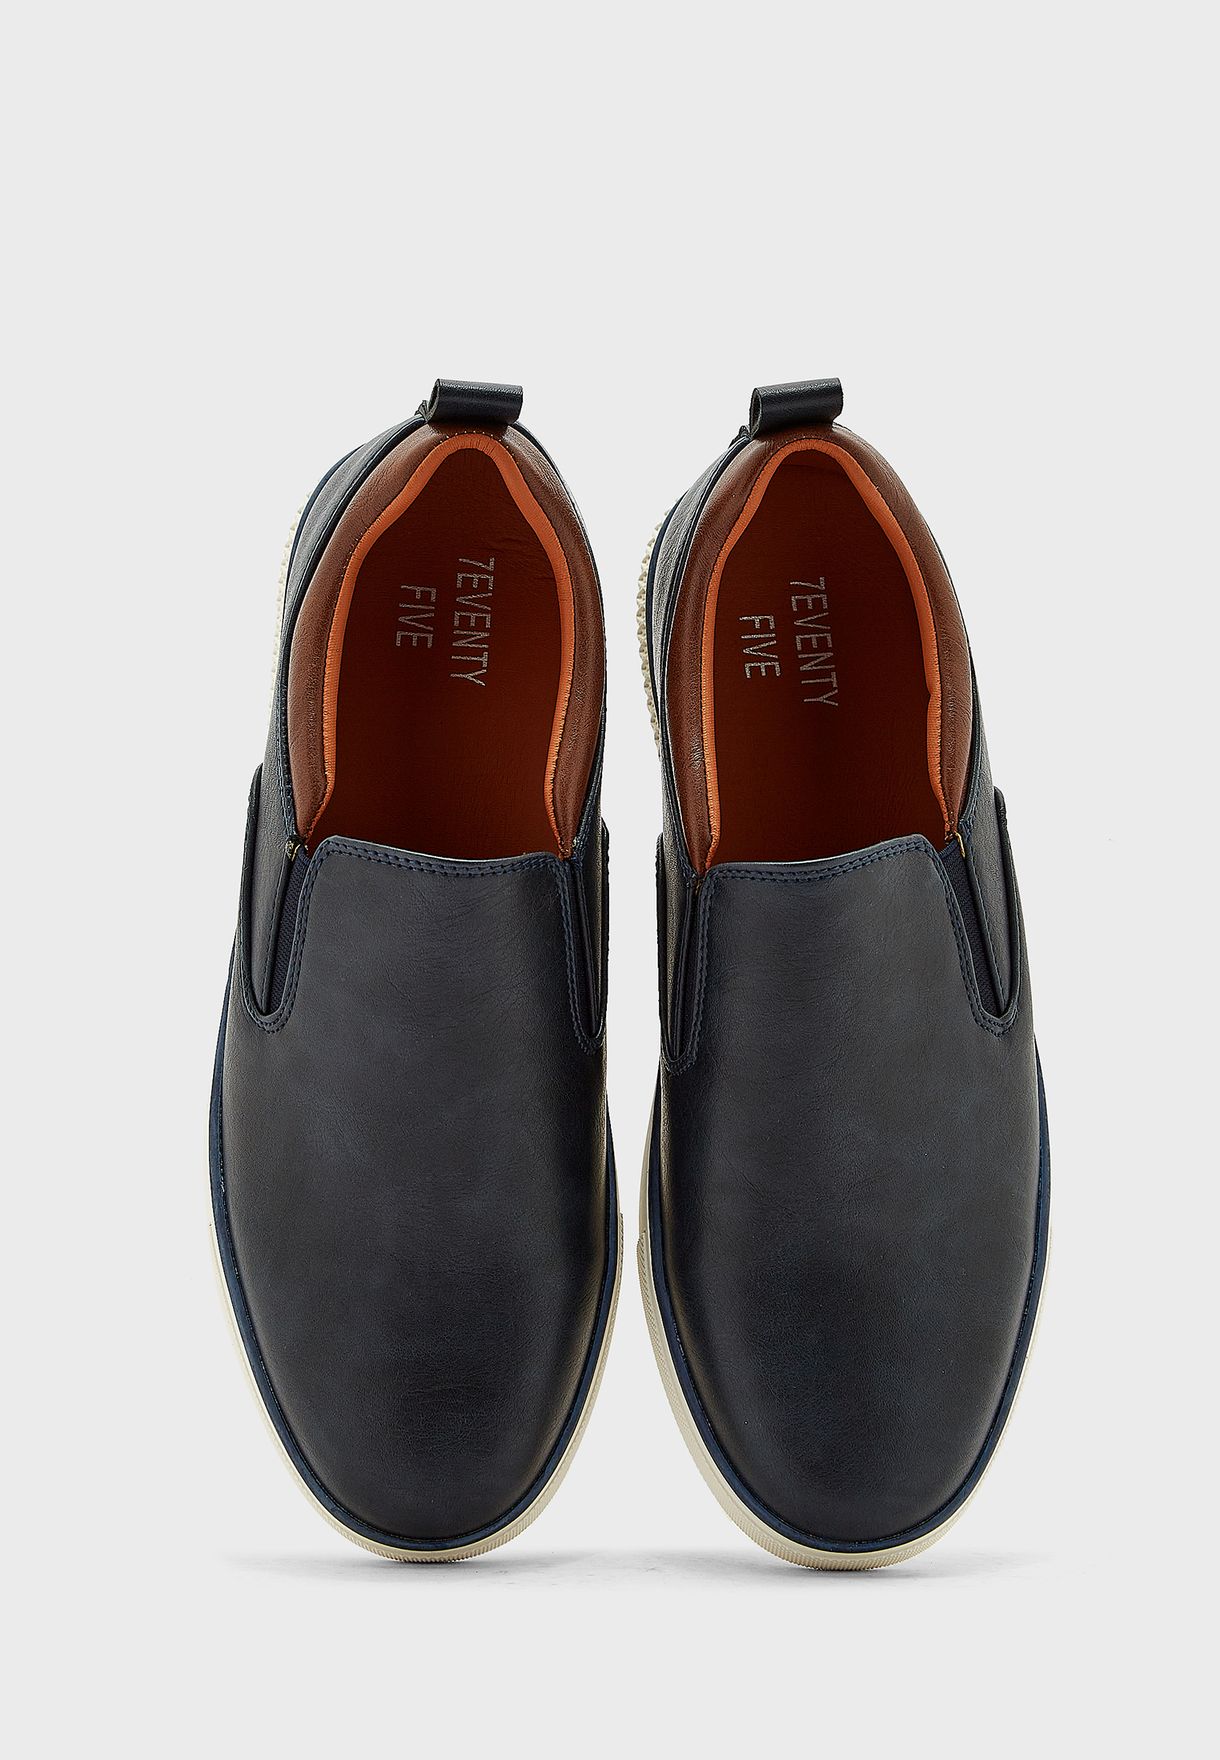 Faux Leather Casual Slip Ons